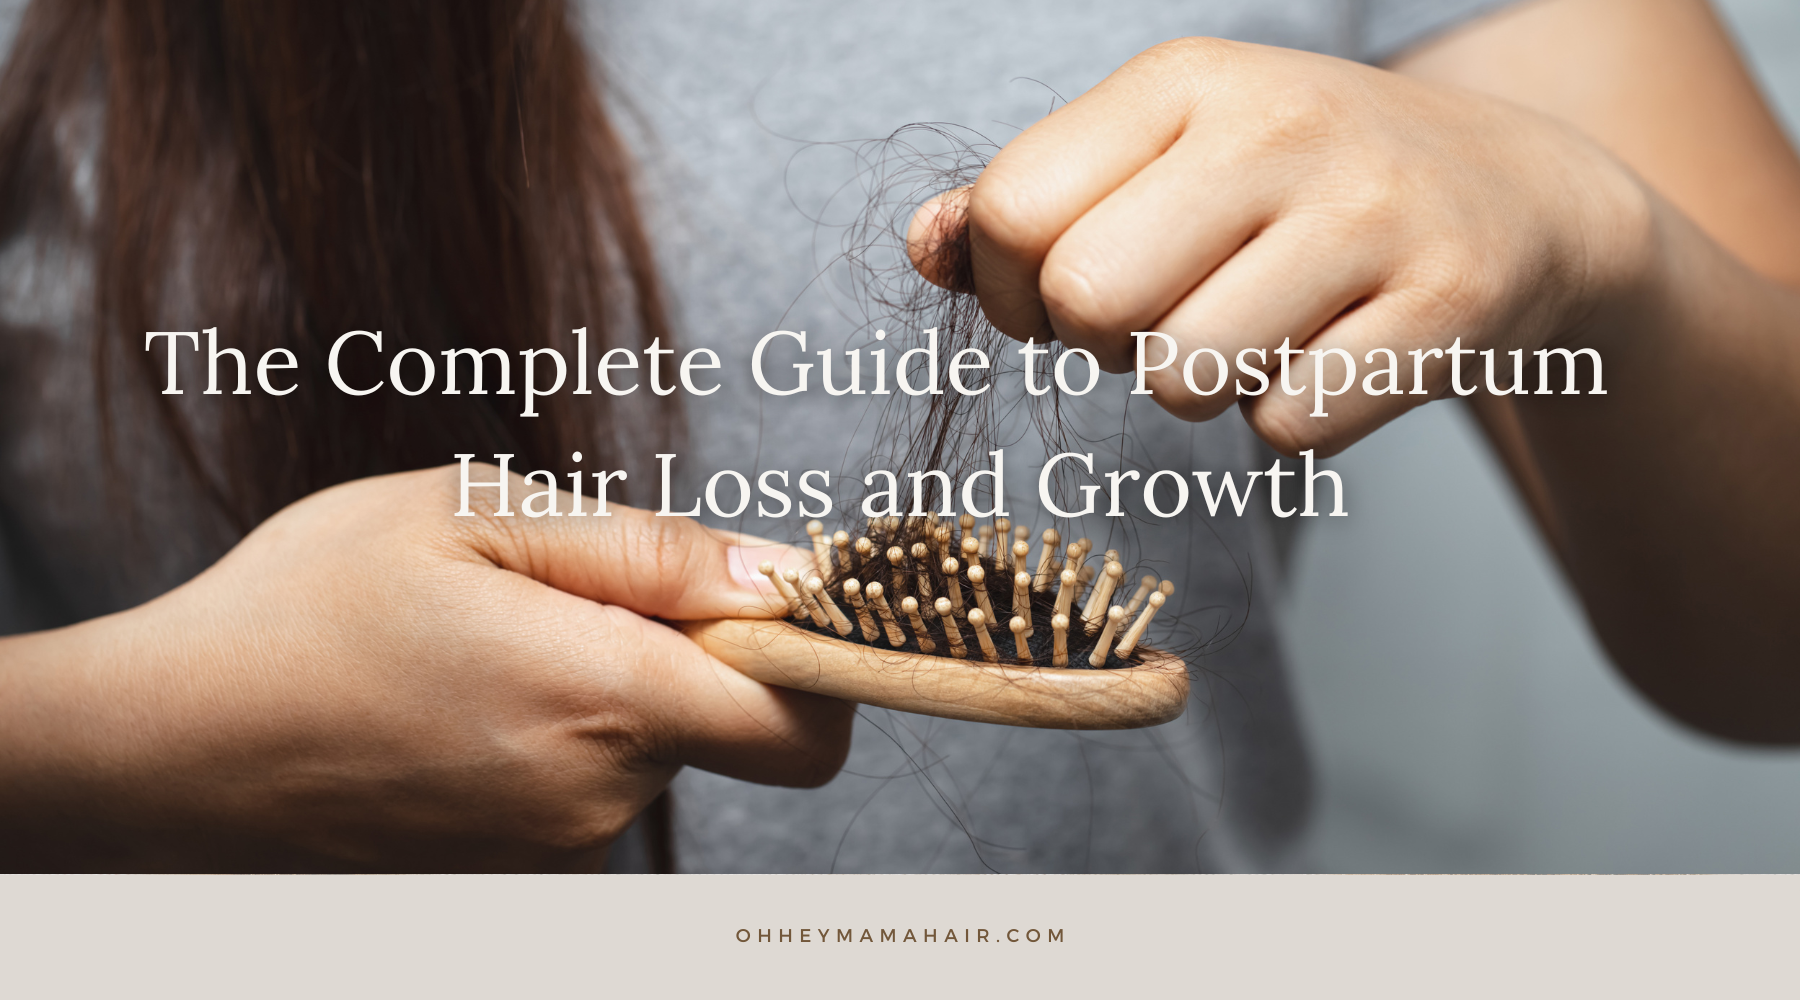 The Complete Guide to Hair Loss and Growth